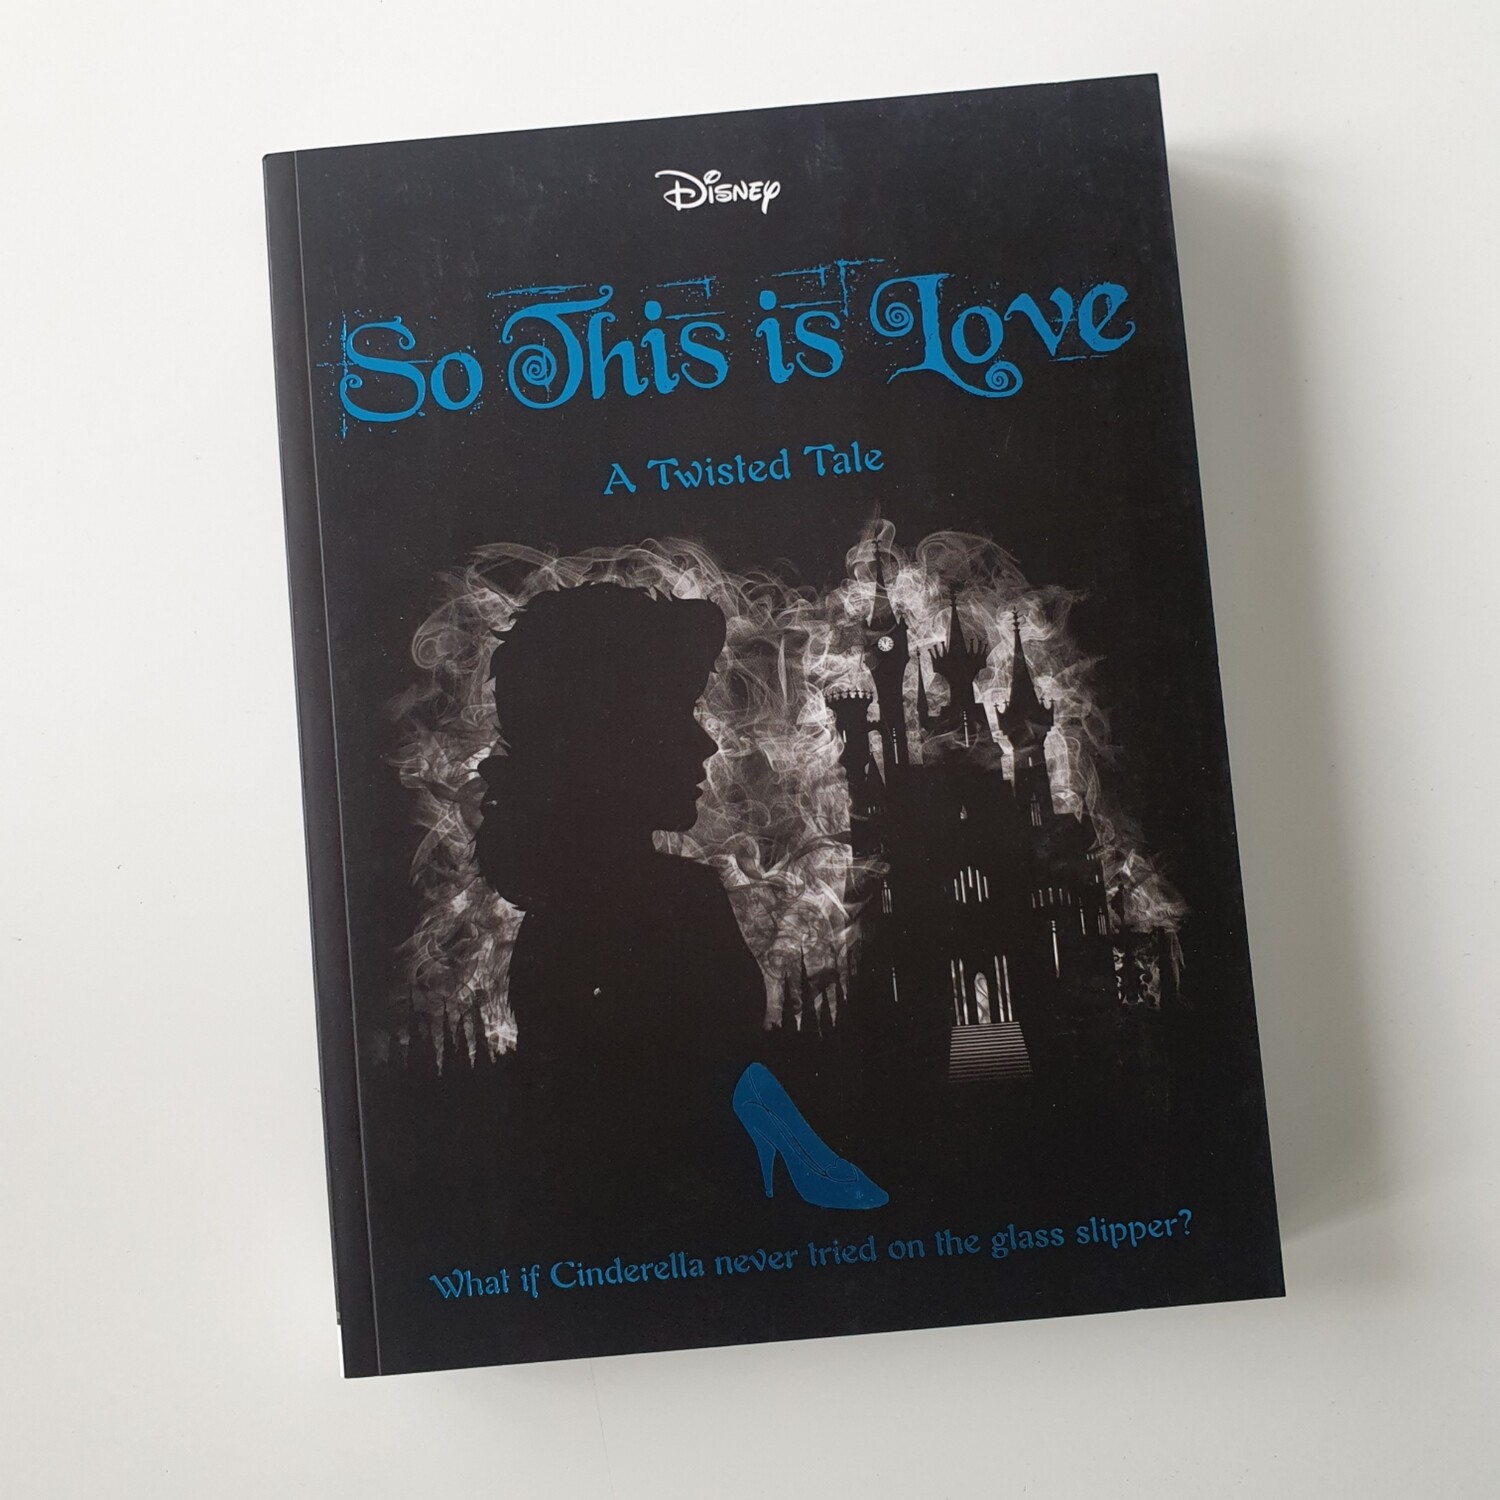 Cinderella - So This is Love -  Twisted Tales, Disney Notebook - made from a paperback book, comes with book corners